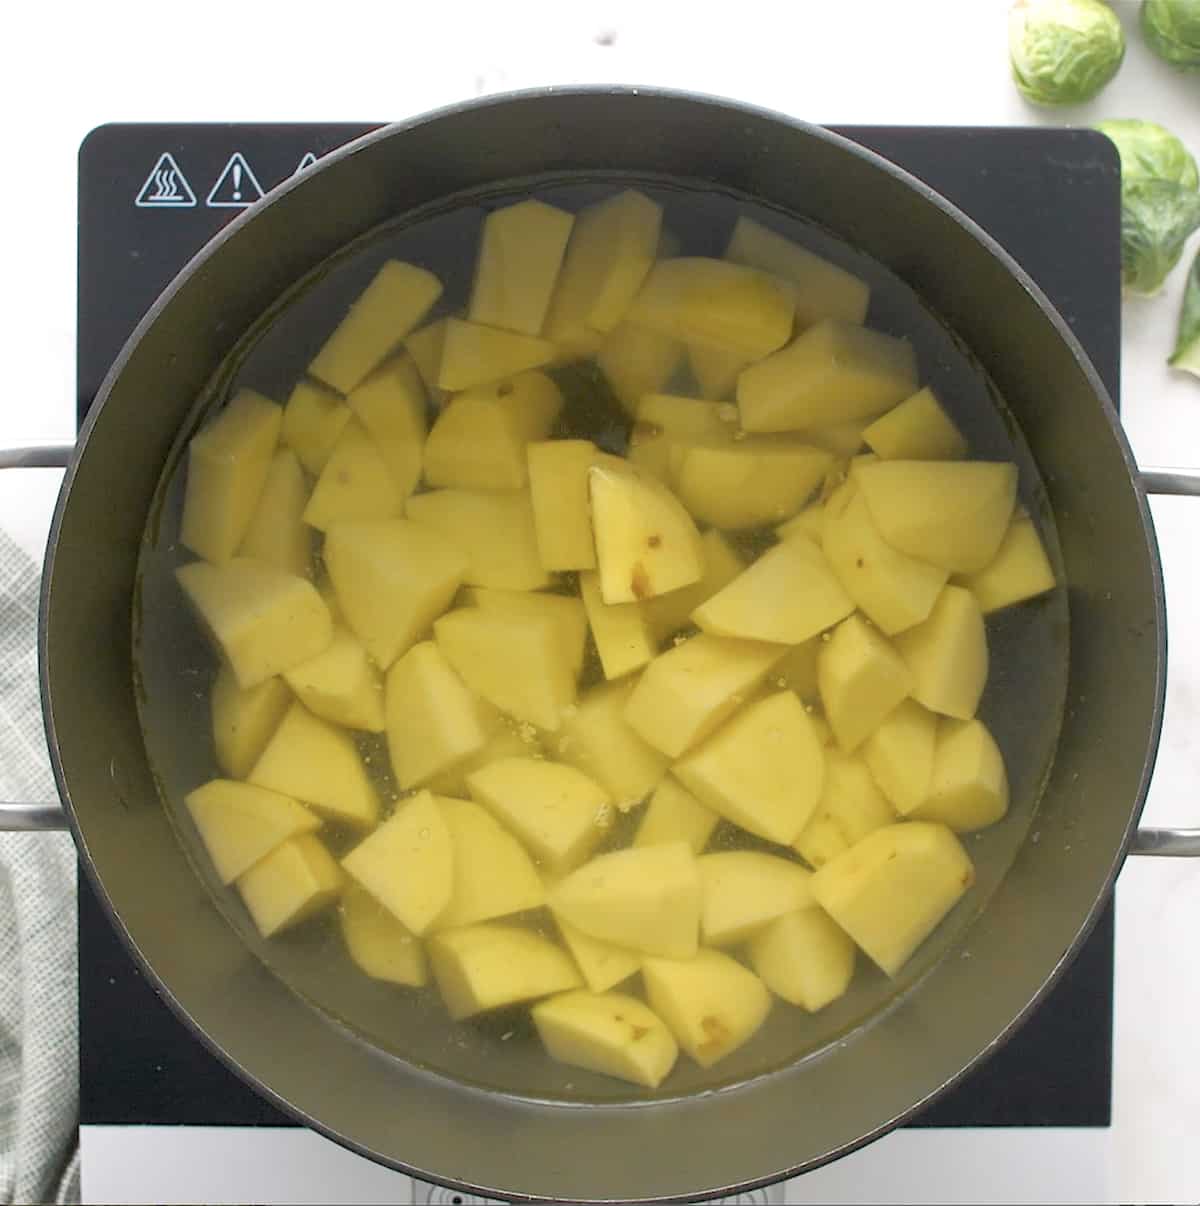 cubed potatoes in a pan of water